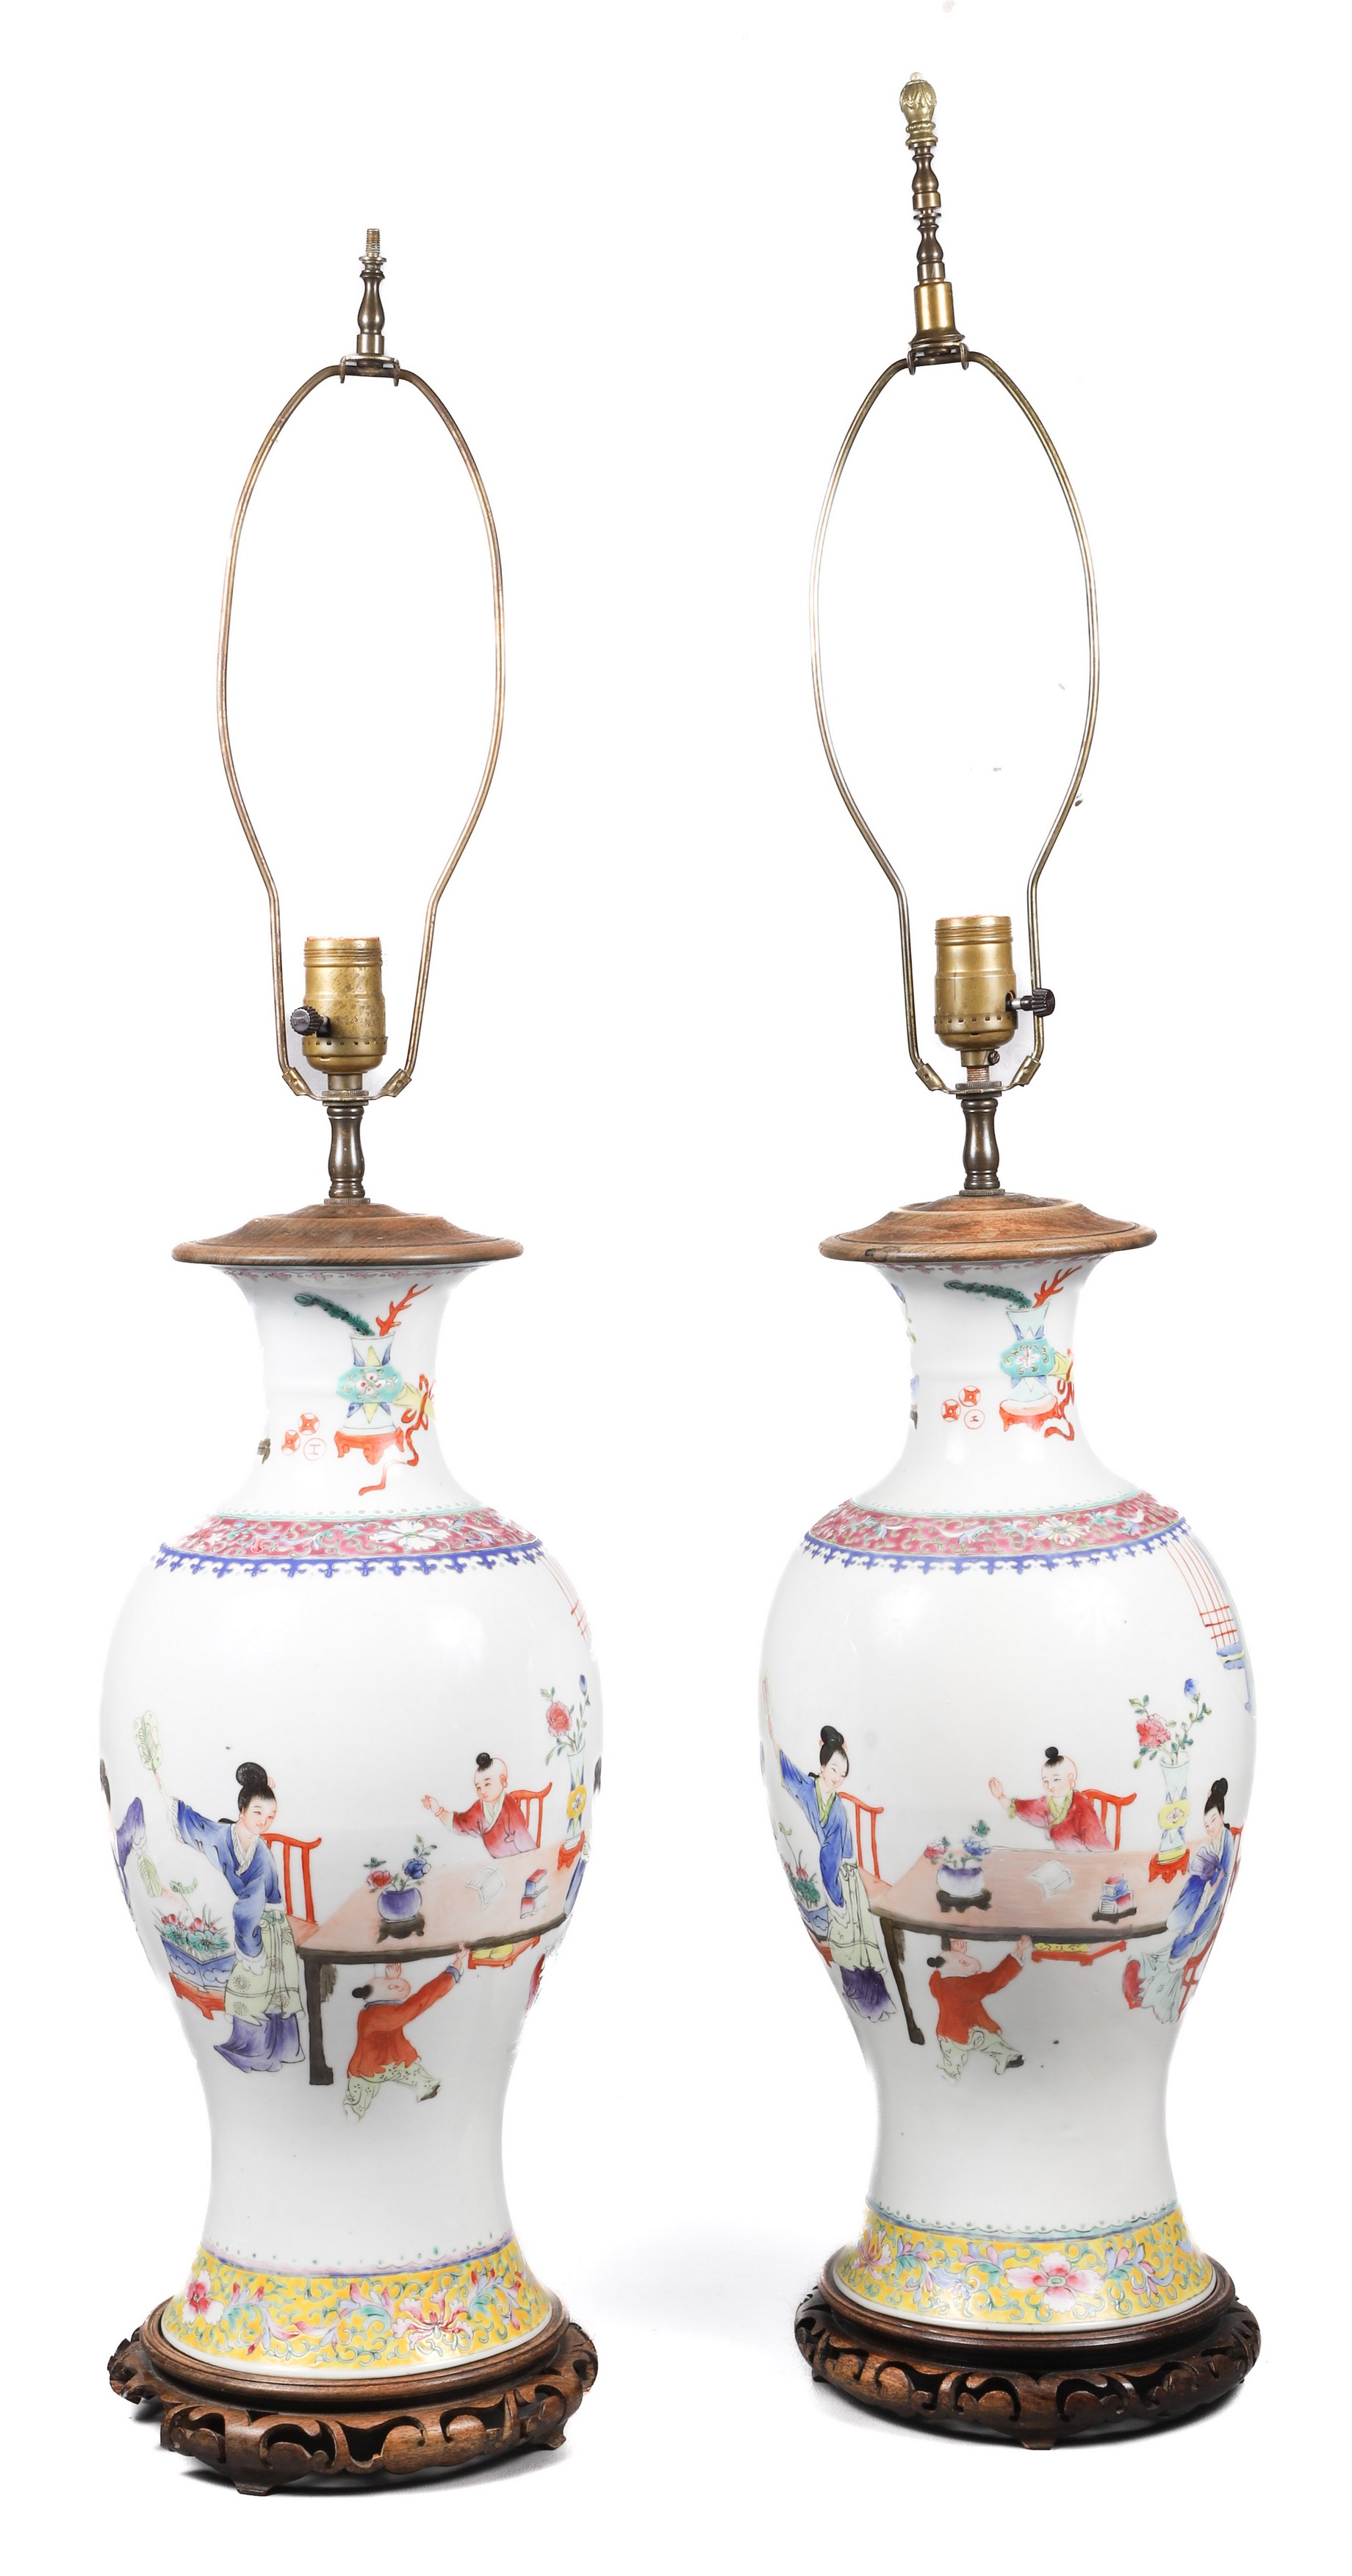 Pair of Chinese porcelain vases,